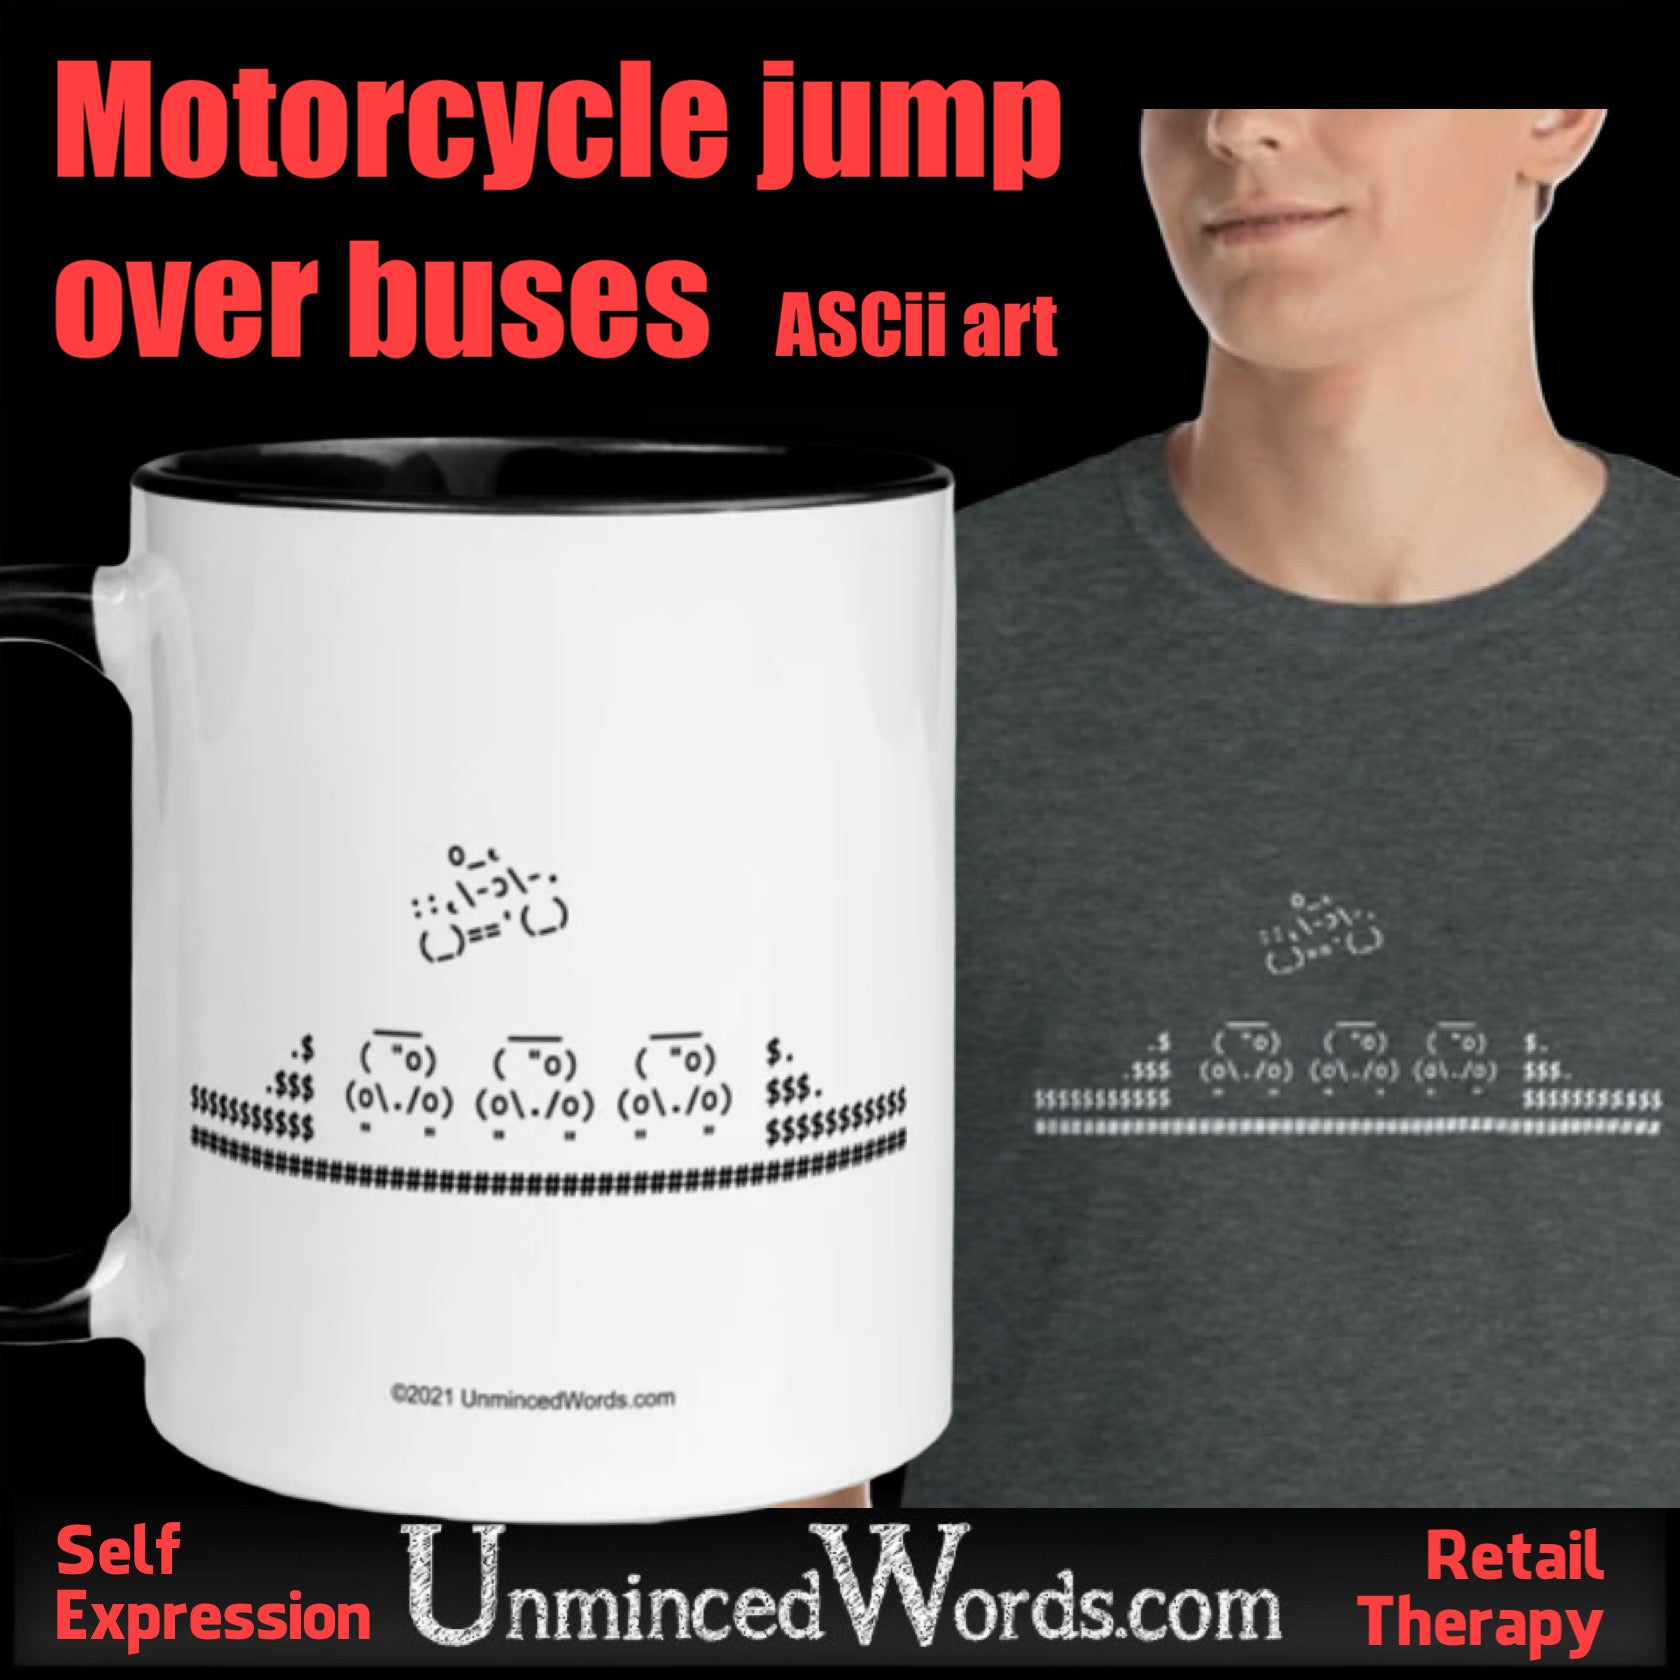 Motorcycle jumping buses is an awesome gift.